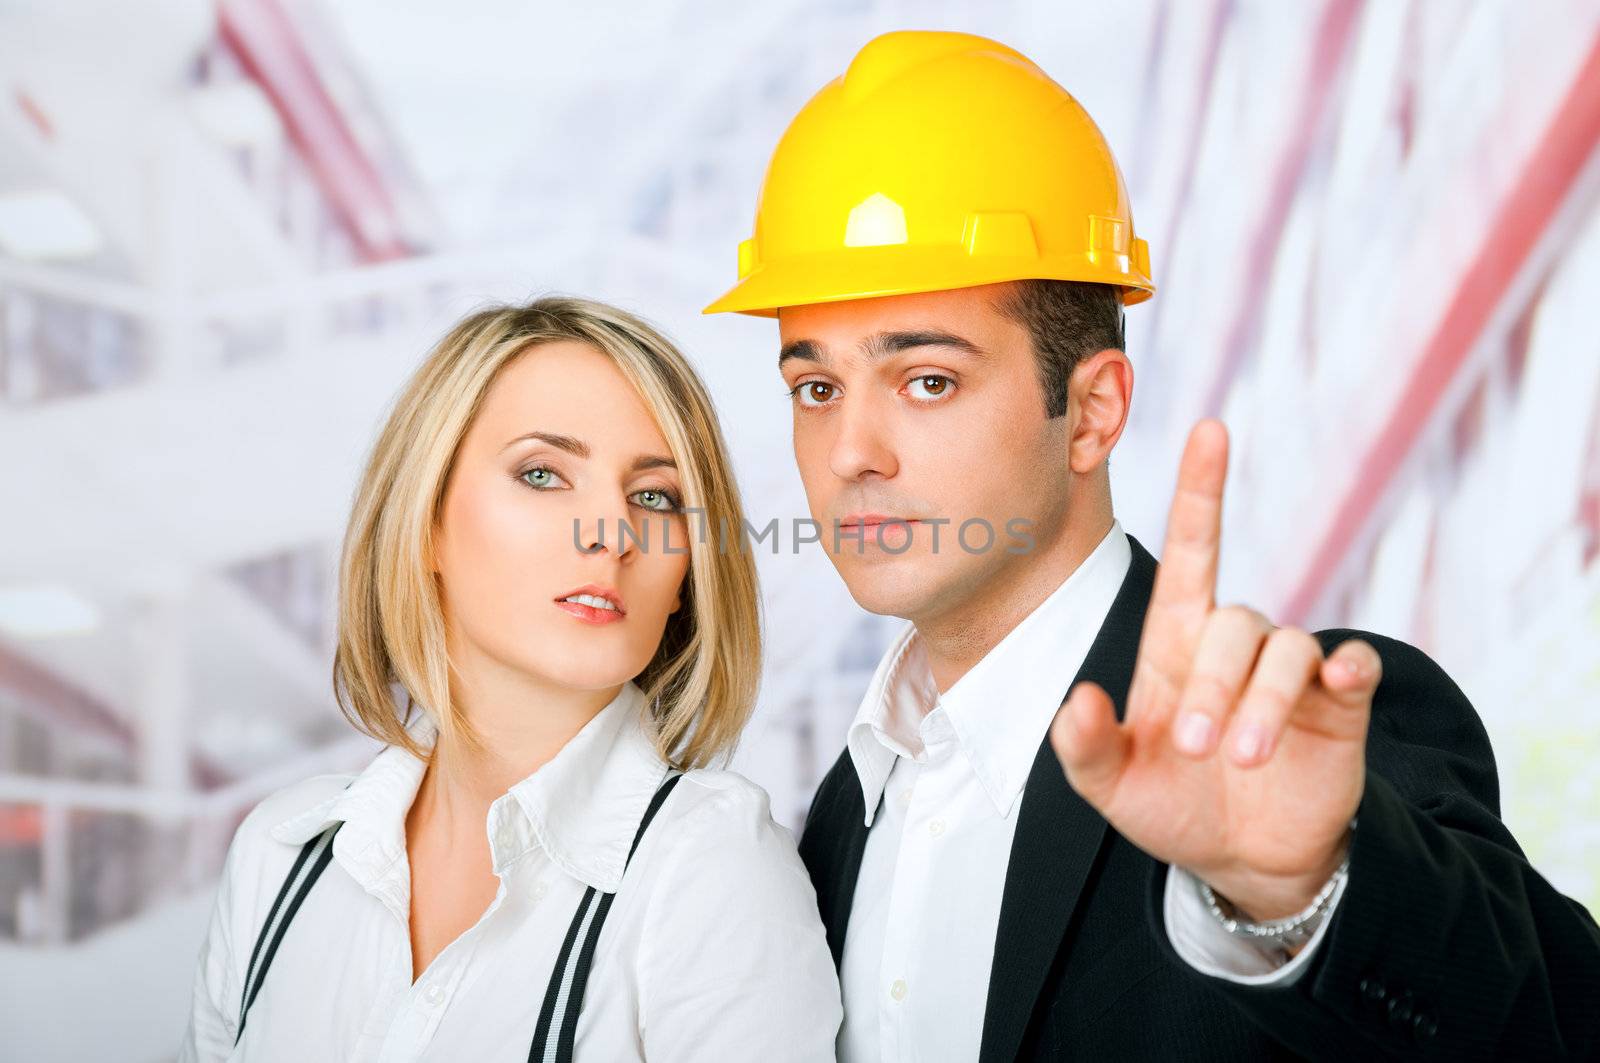 Male and female architects looking at camera, man wearing hardhat and pointing with finger